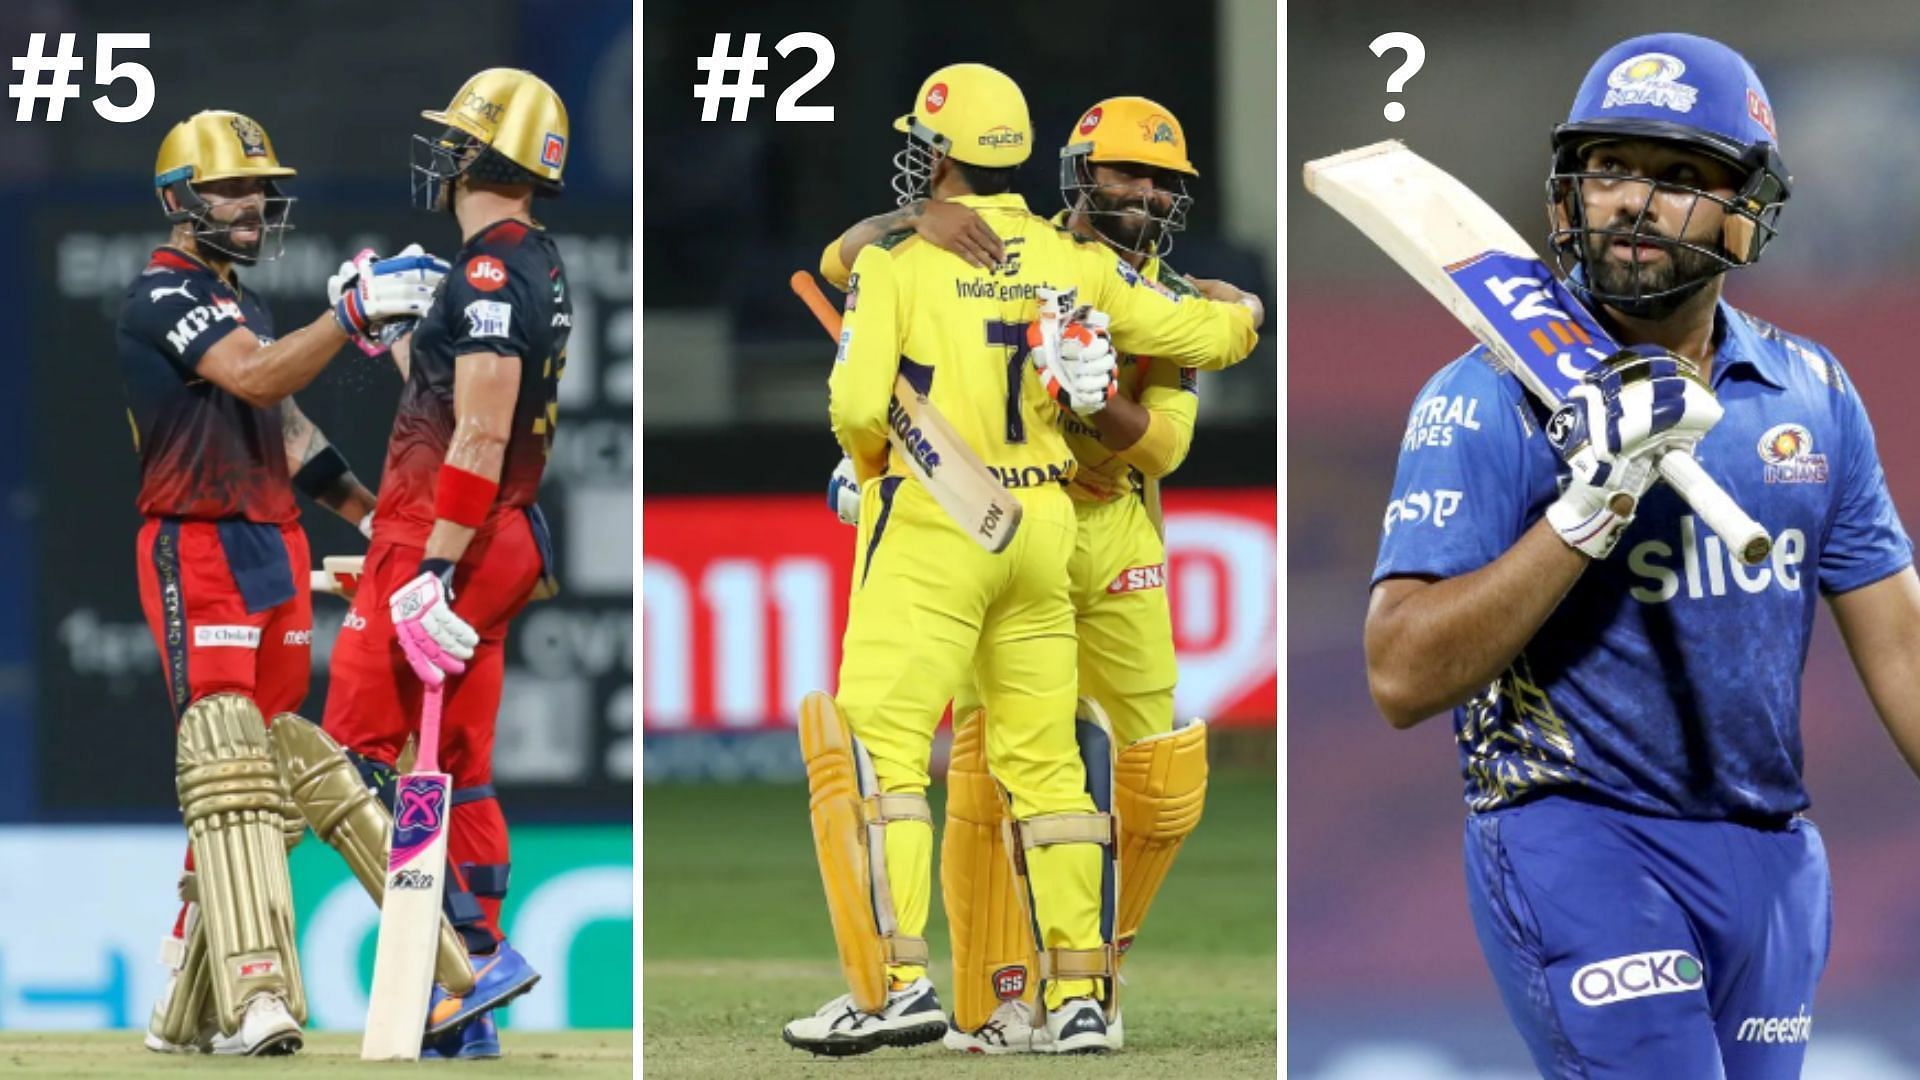 RCB, CSK and MI are three of the biggest franchises in the IPL